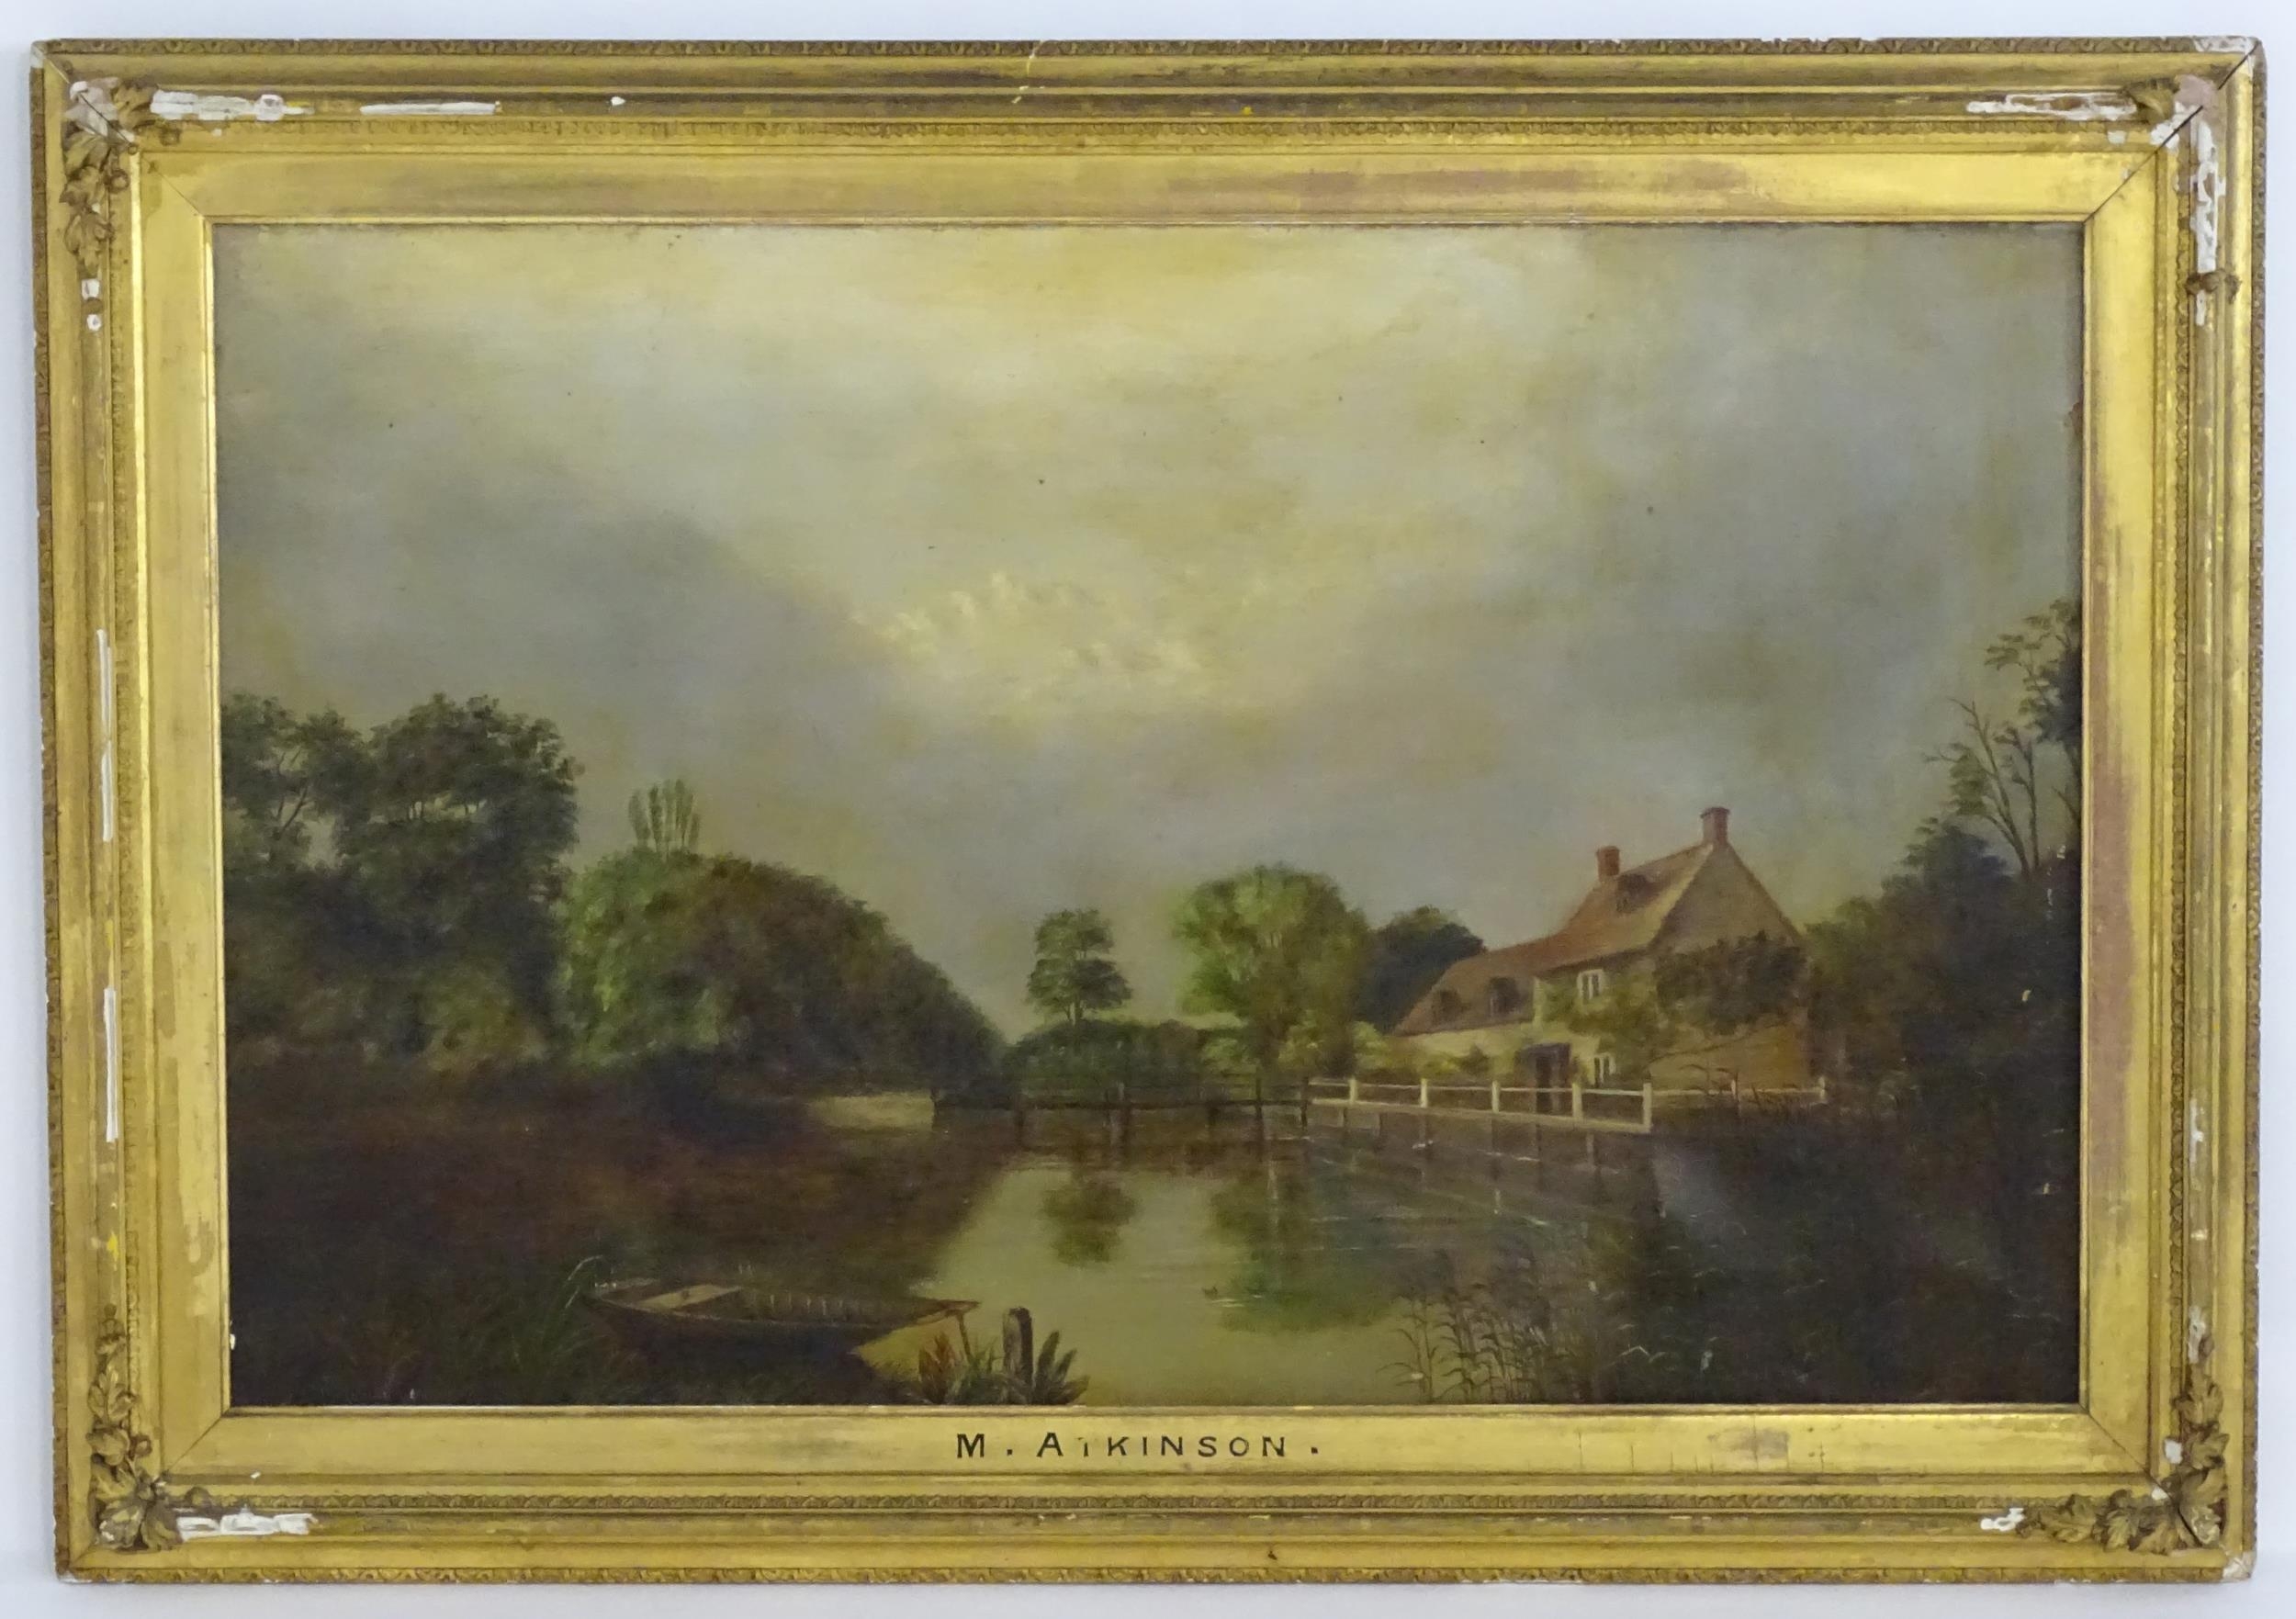 M. Atkinson, 19th century, Oil on canvas, A river landscape with a bridge, cottage and moored